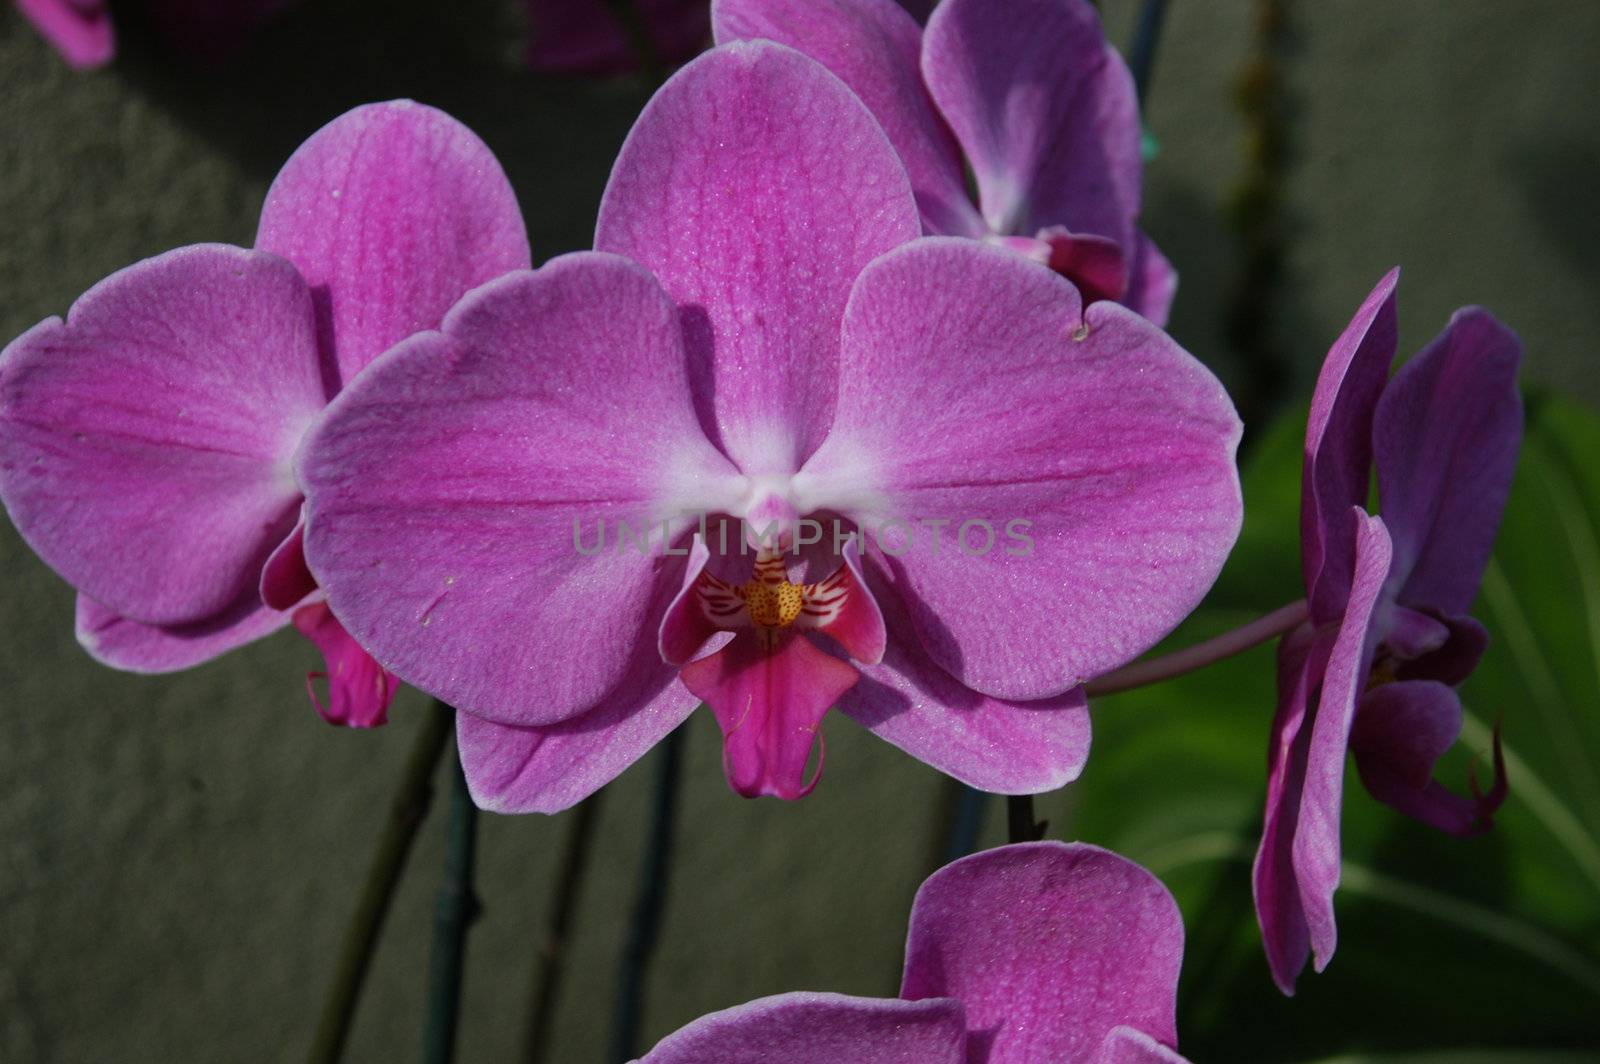 A closeup view of  purple orchids in bloom